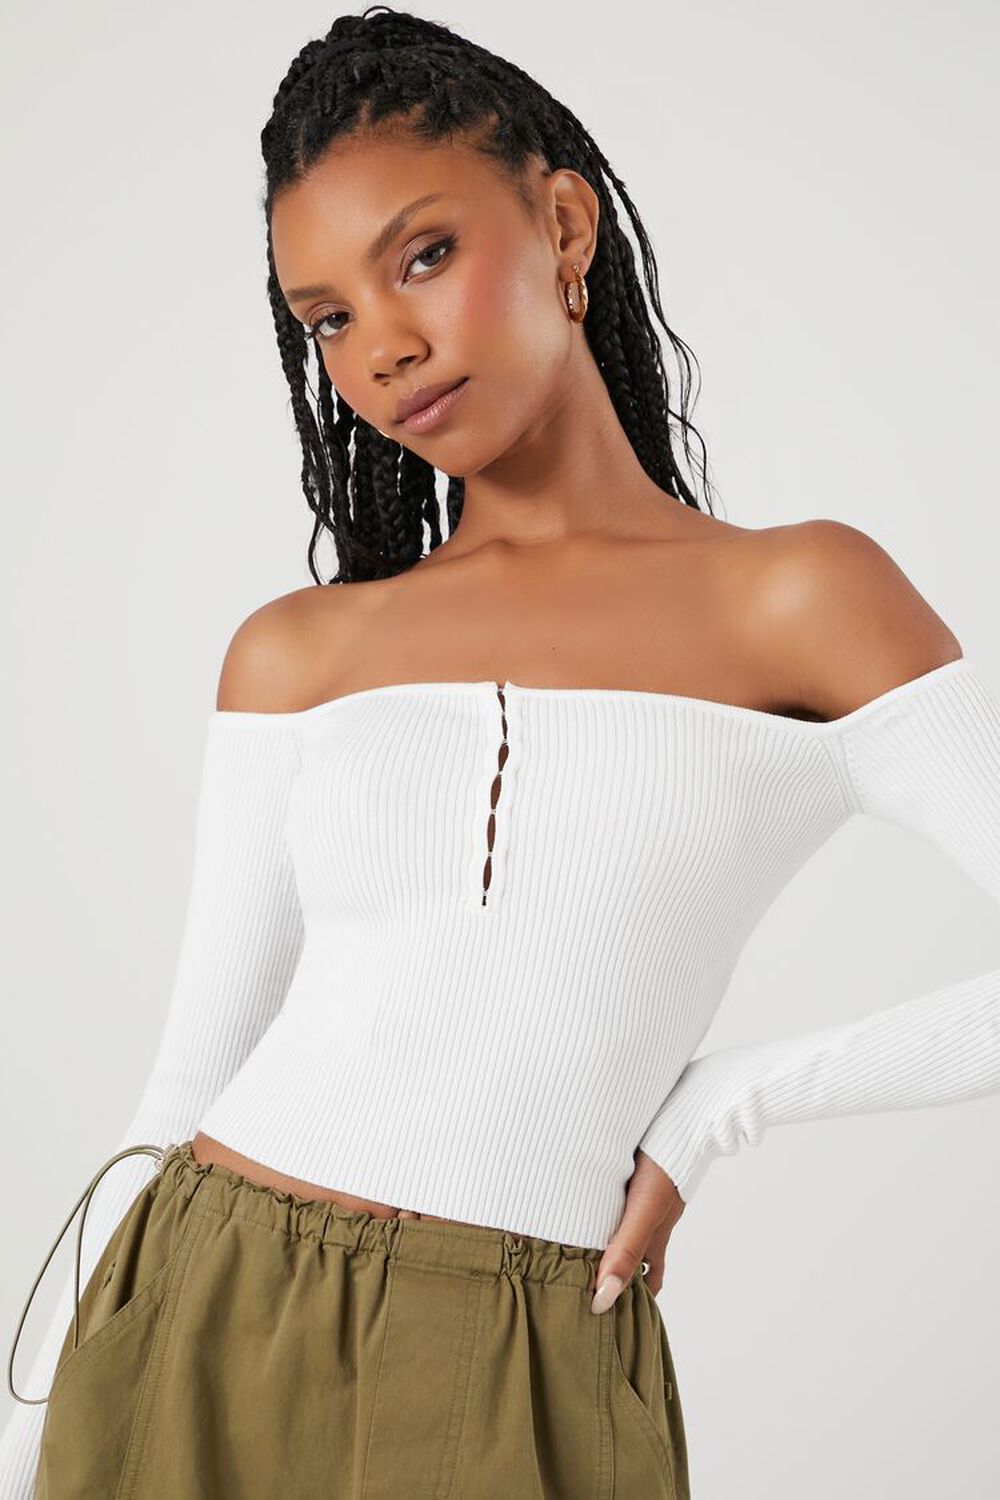 WHITE Sweater-Knit Off-the-Shoulder Top, image 1